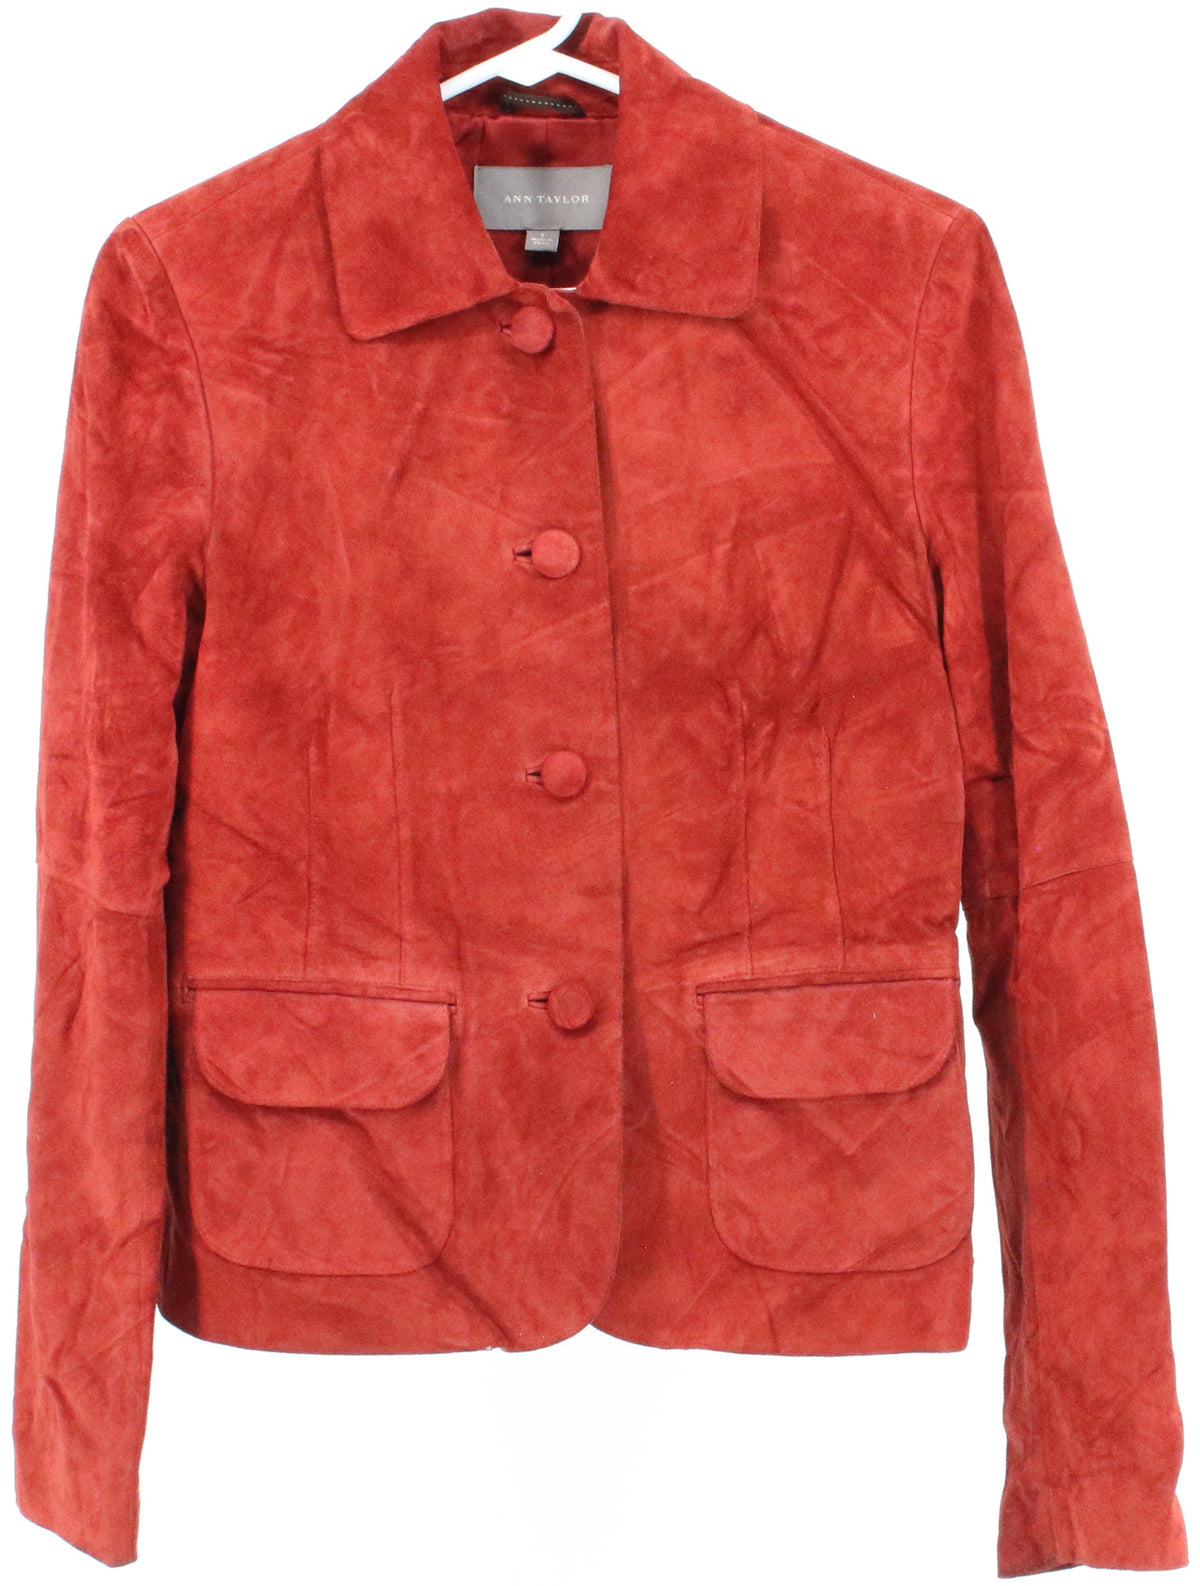 Ann Taylor Red Leather Jacket